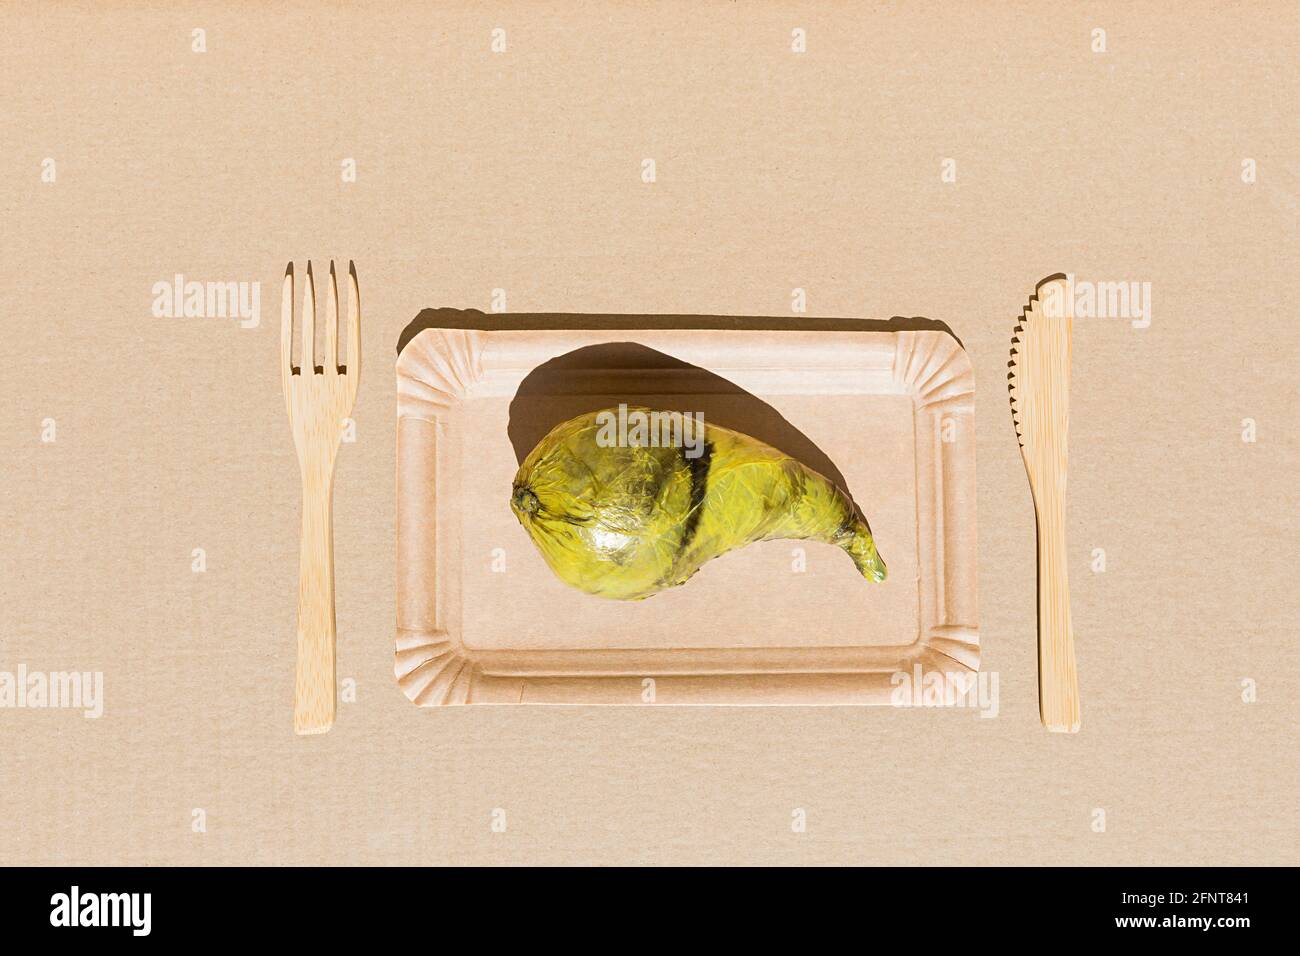 Pear wrapped in plastic on the beige paper background. Immature, tasteless or inedible food concept. Copy space. Flat lay. Stock Photo